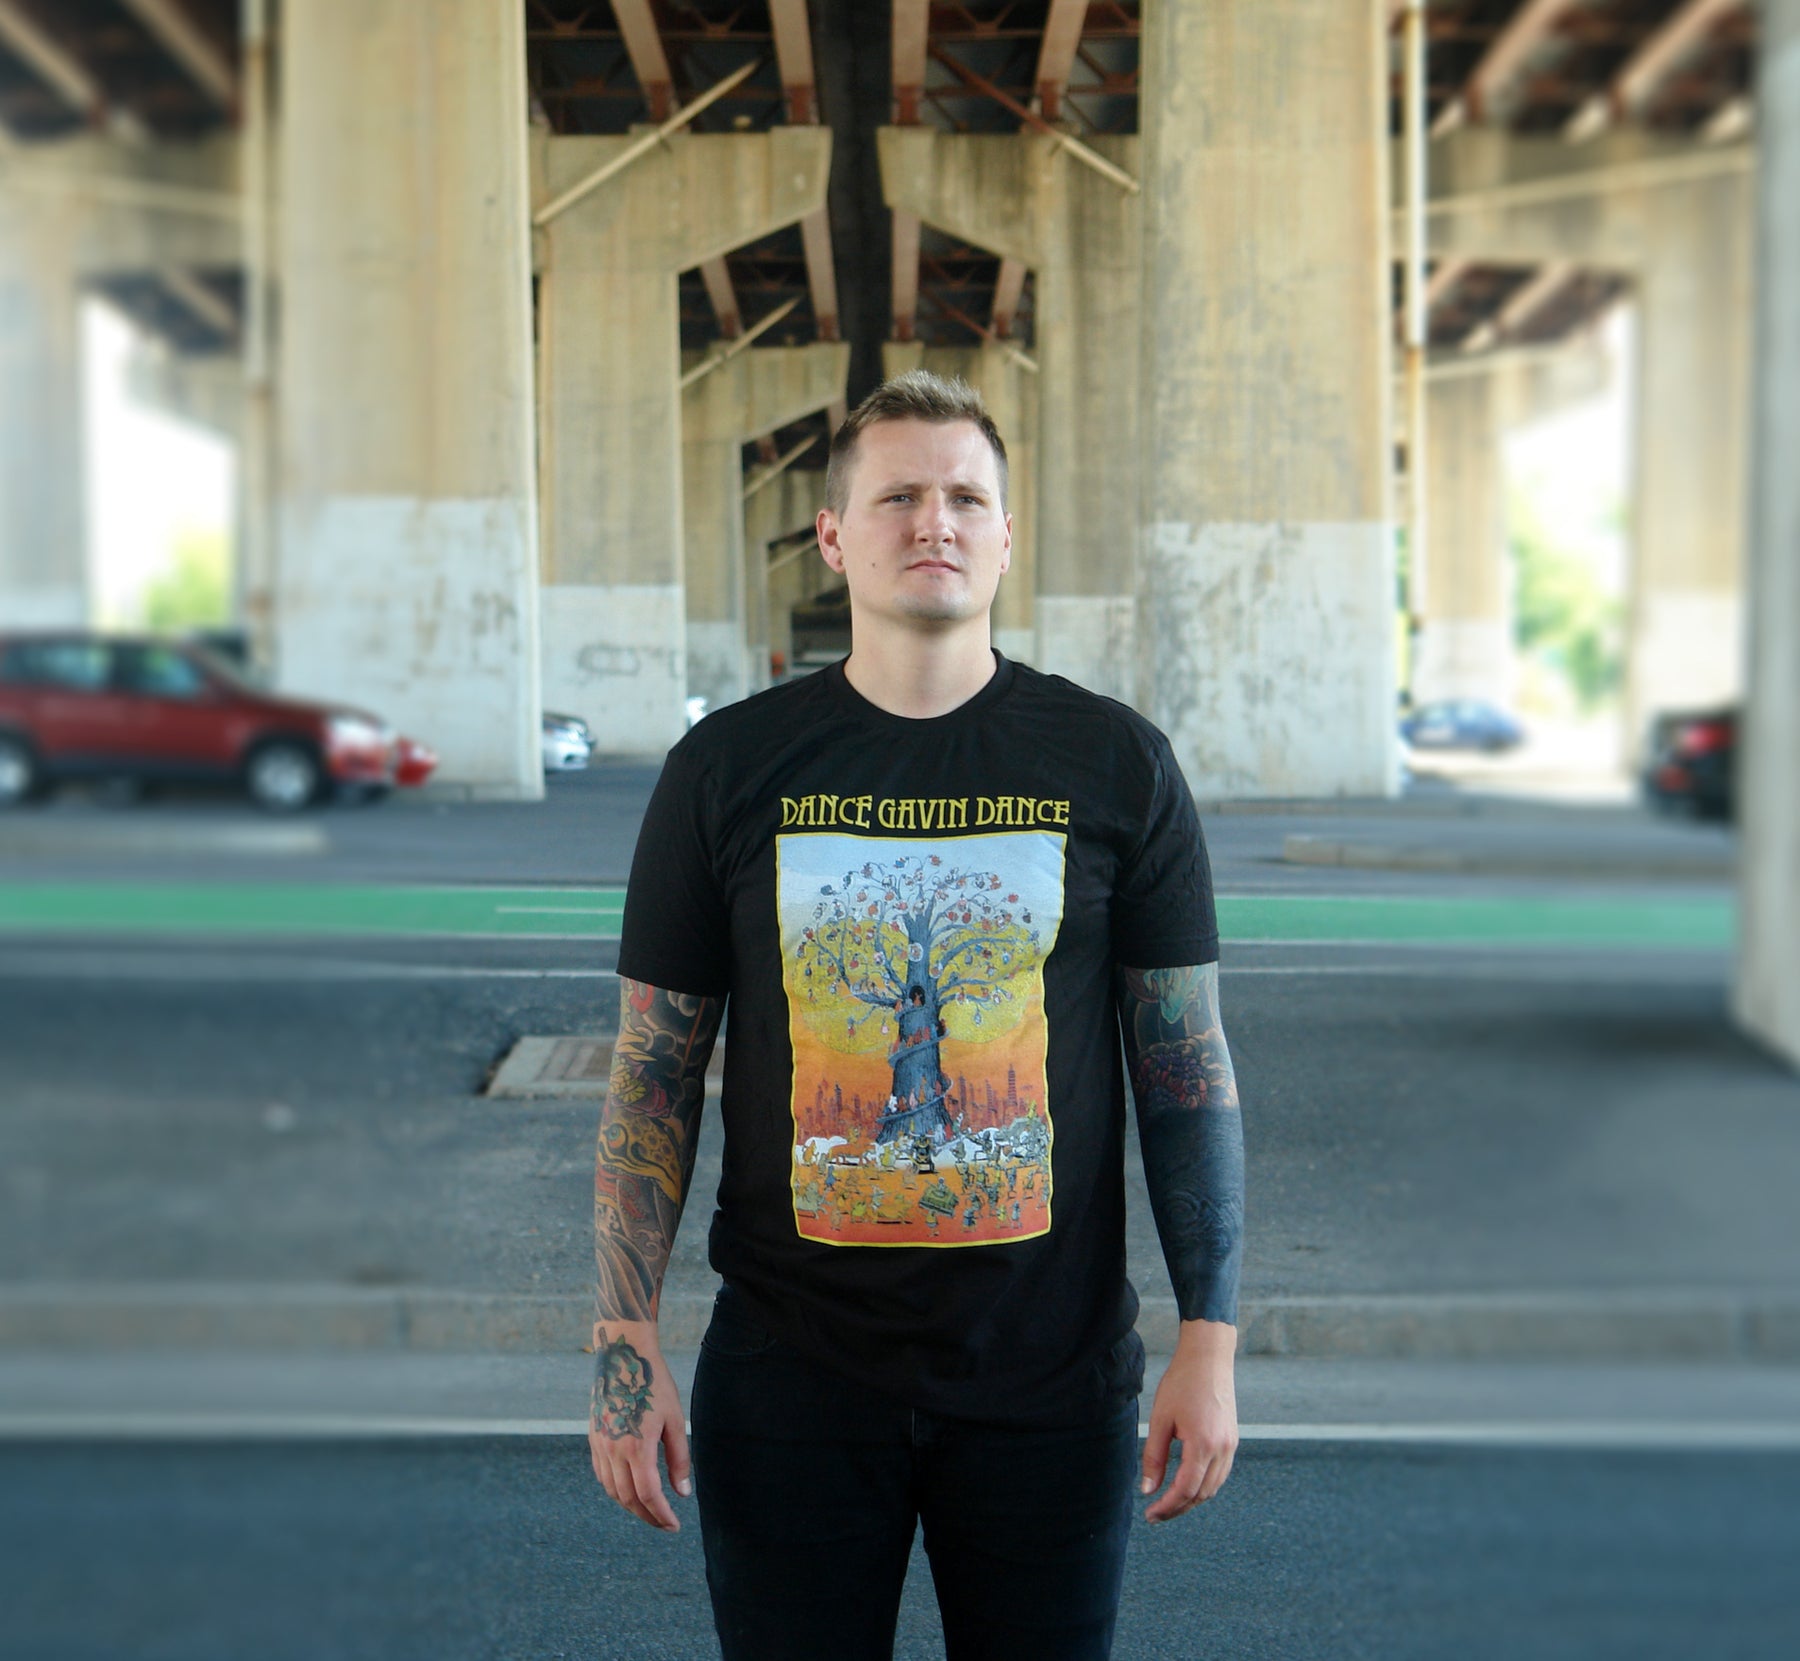 white man with short hair and tattoos on both arms standing under bridge wearing black pants and black tee shirt. black tee shirt has full chest print with yellow print on top that says dance gavin dance and a rectangle below that shows a multicolored tree with several characters surrounding it.